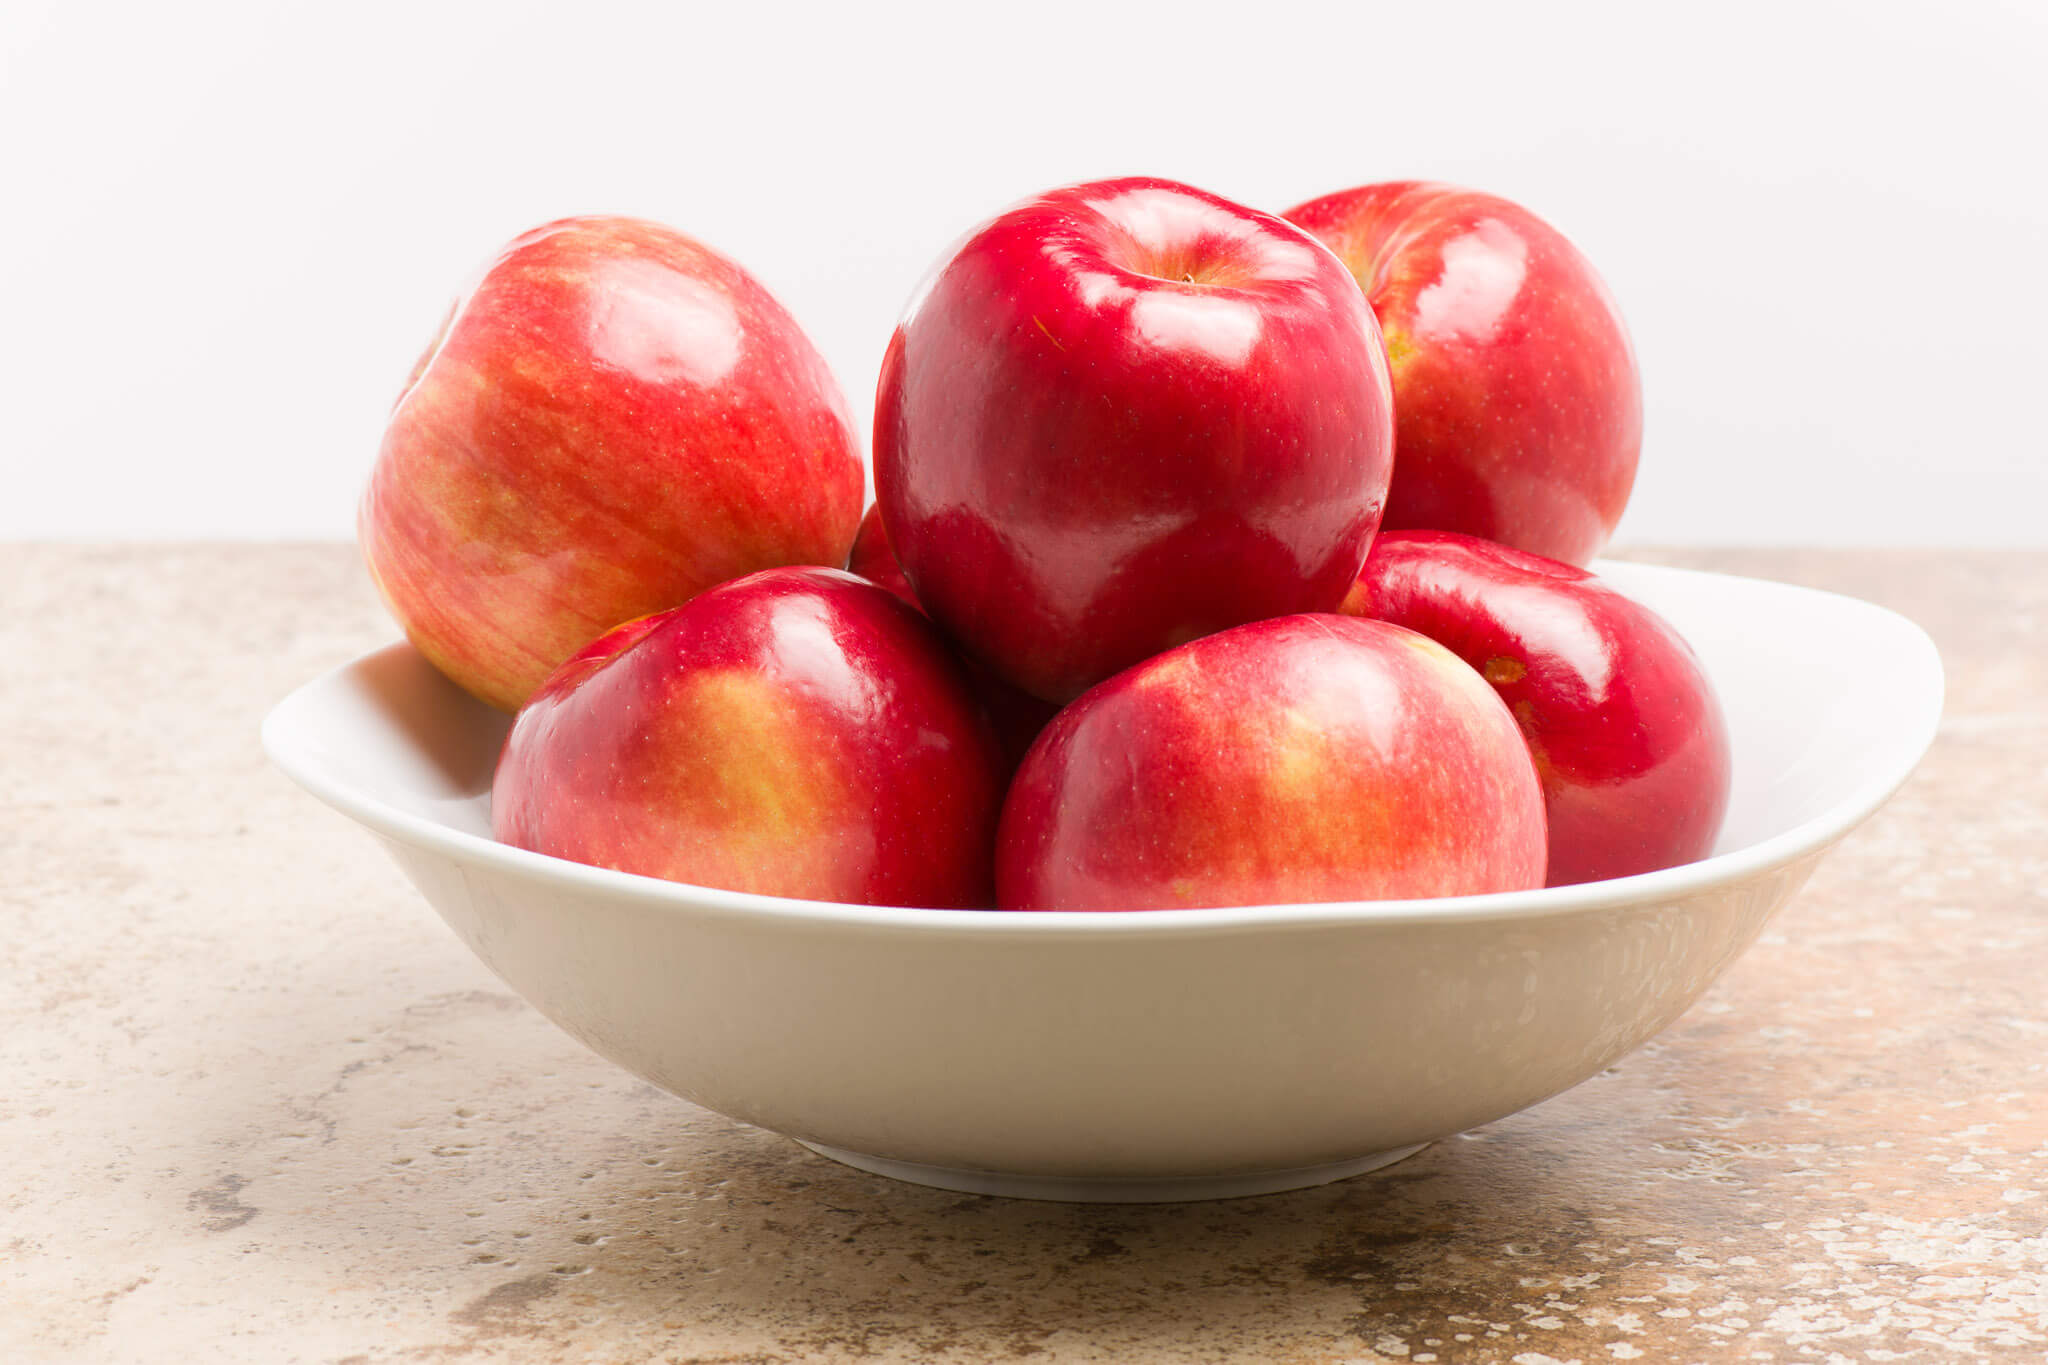 Envy apples: Sweet red apples with a coveted crunch